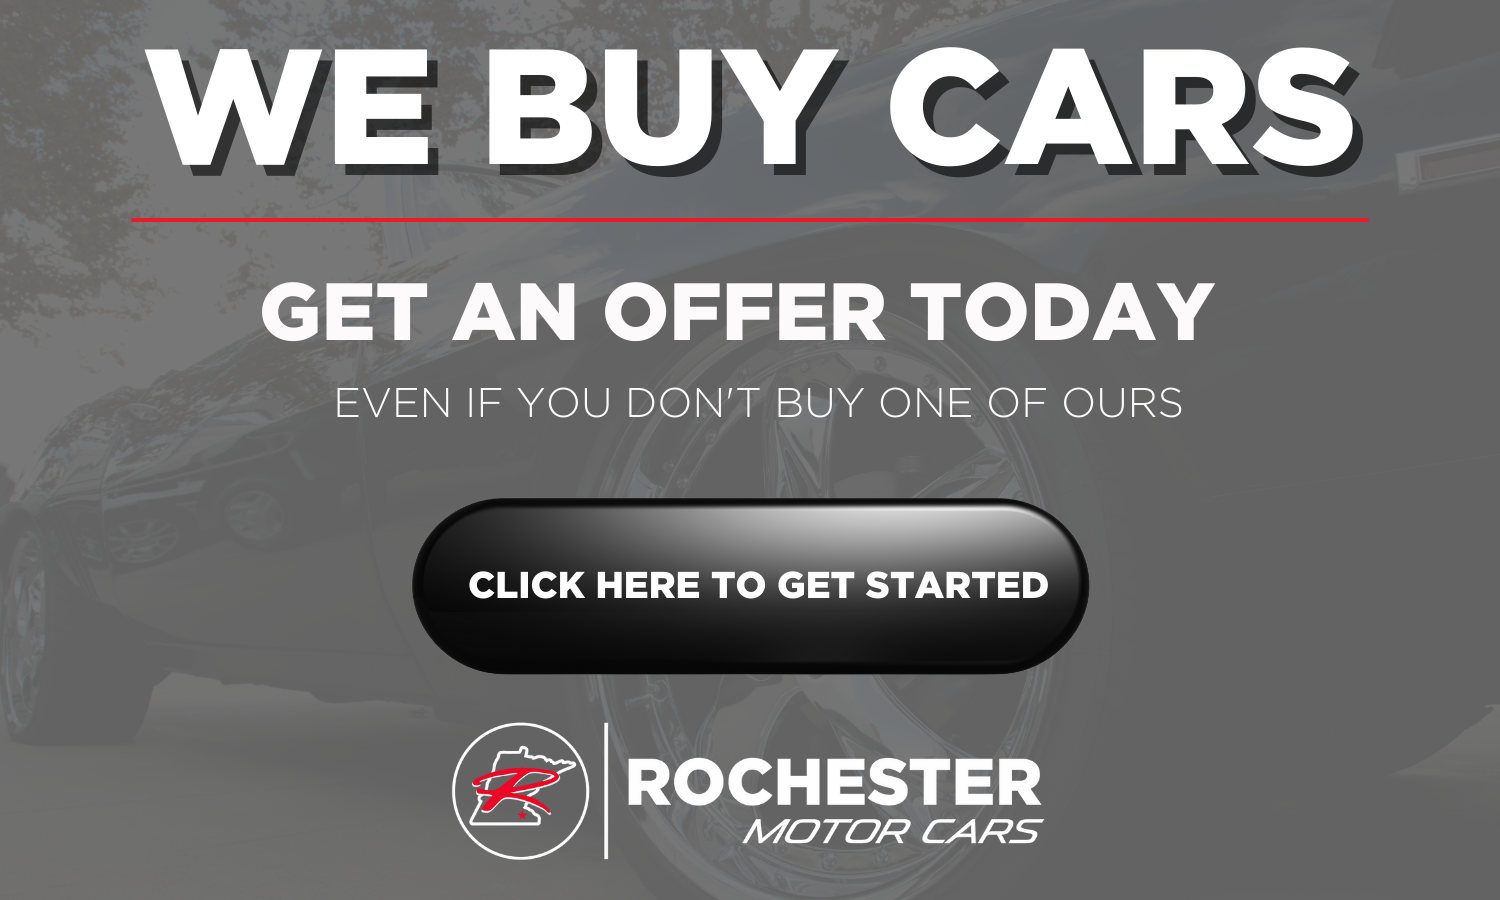 Sell Your Car To Rochester Motor Cars